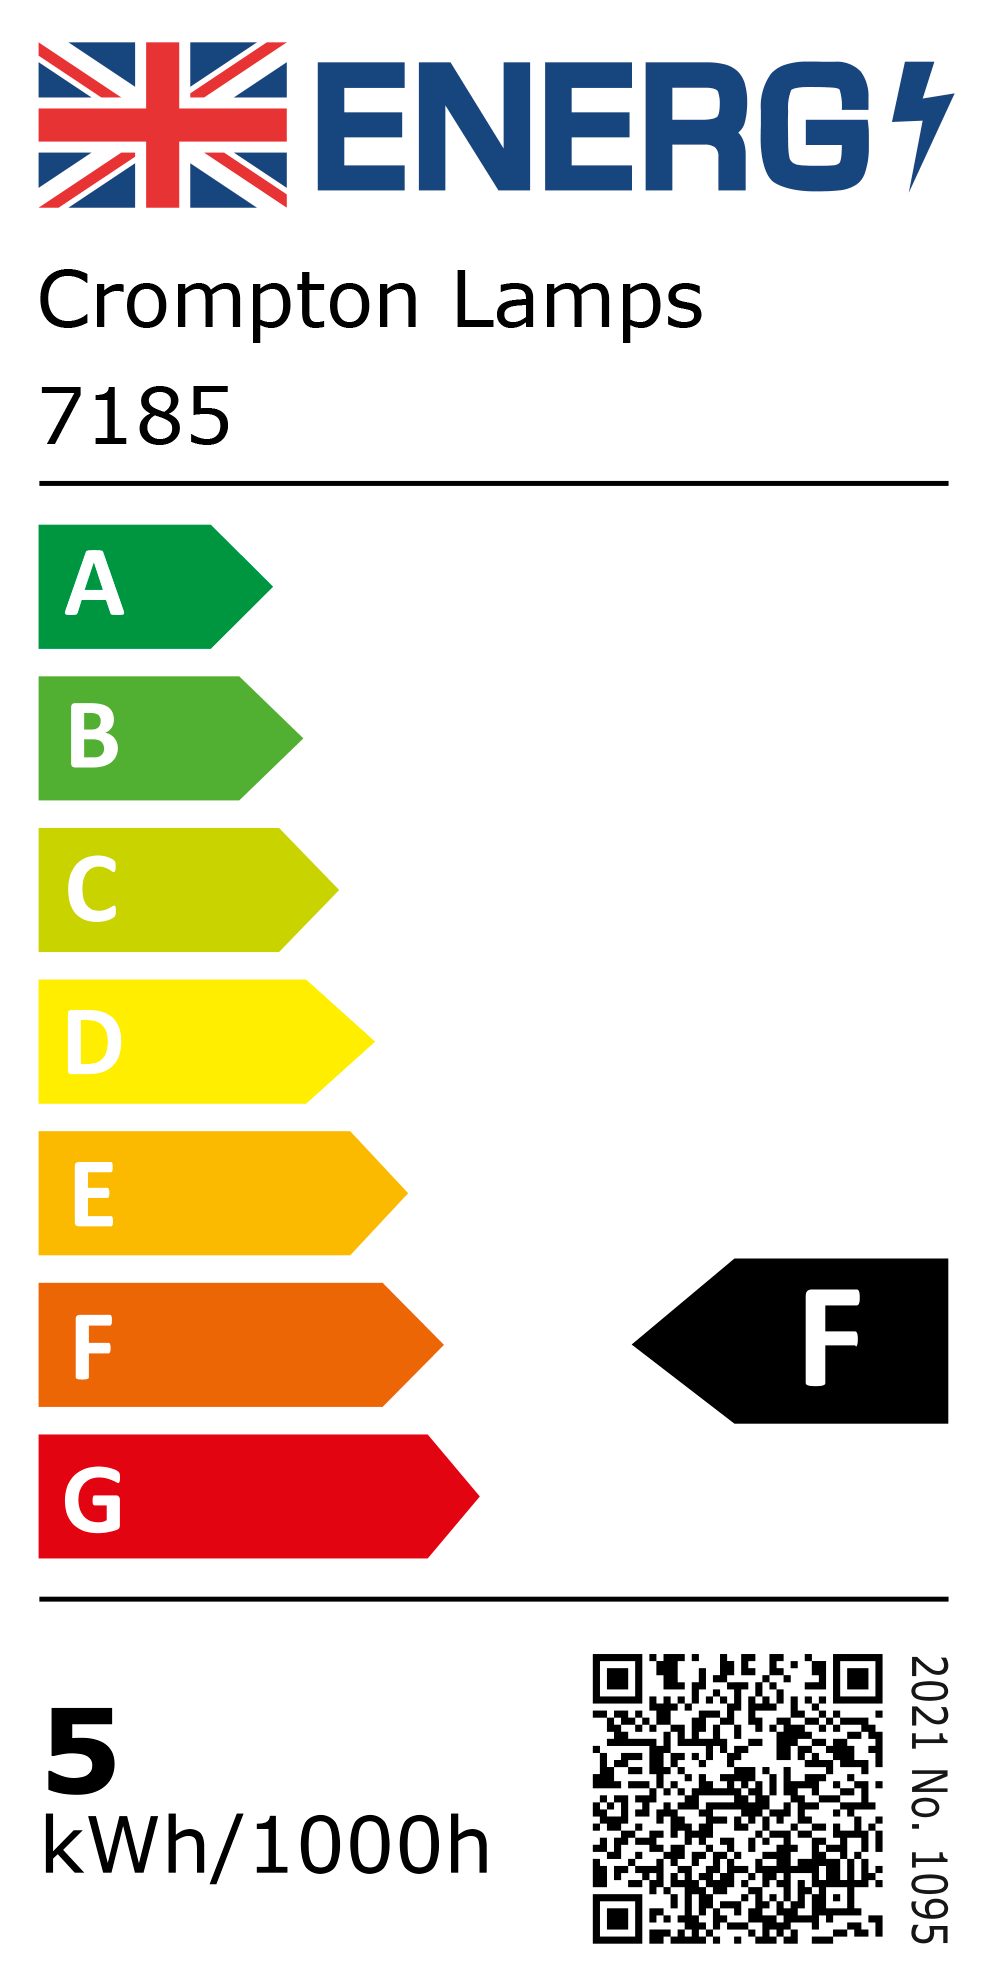 New 2021 Energy Rating Label: Stock Code 7185